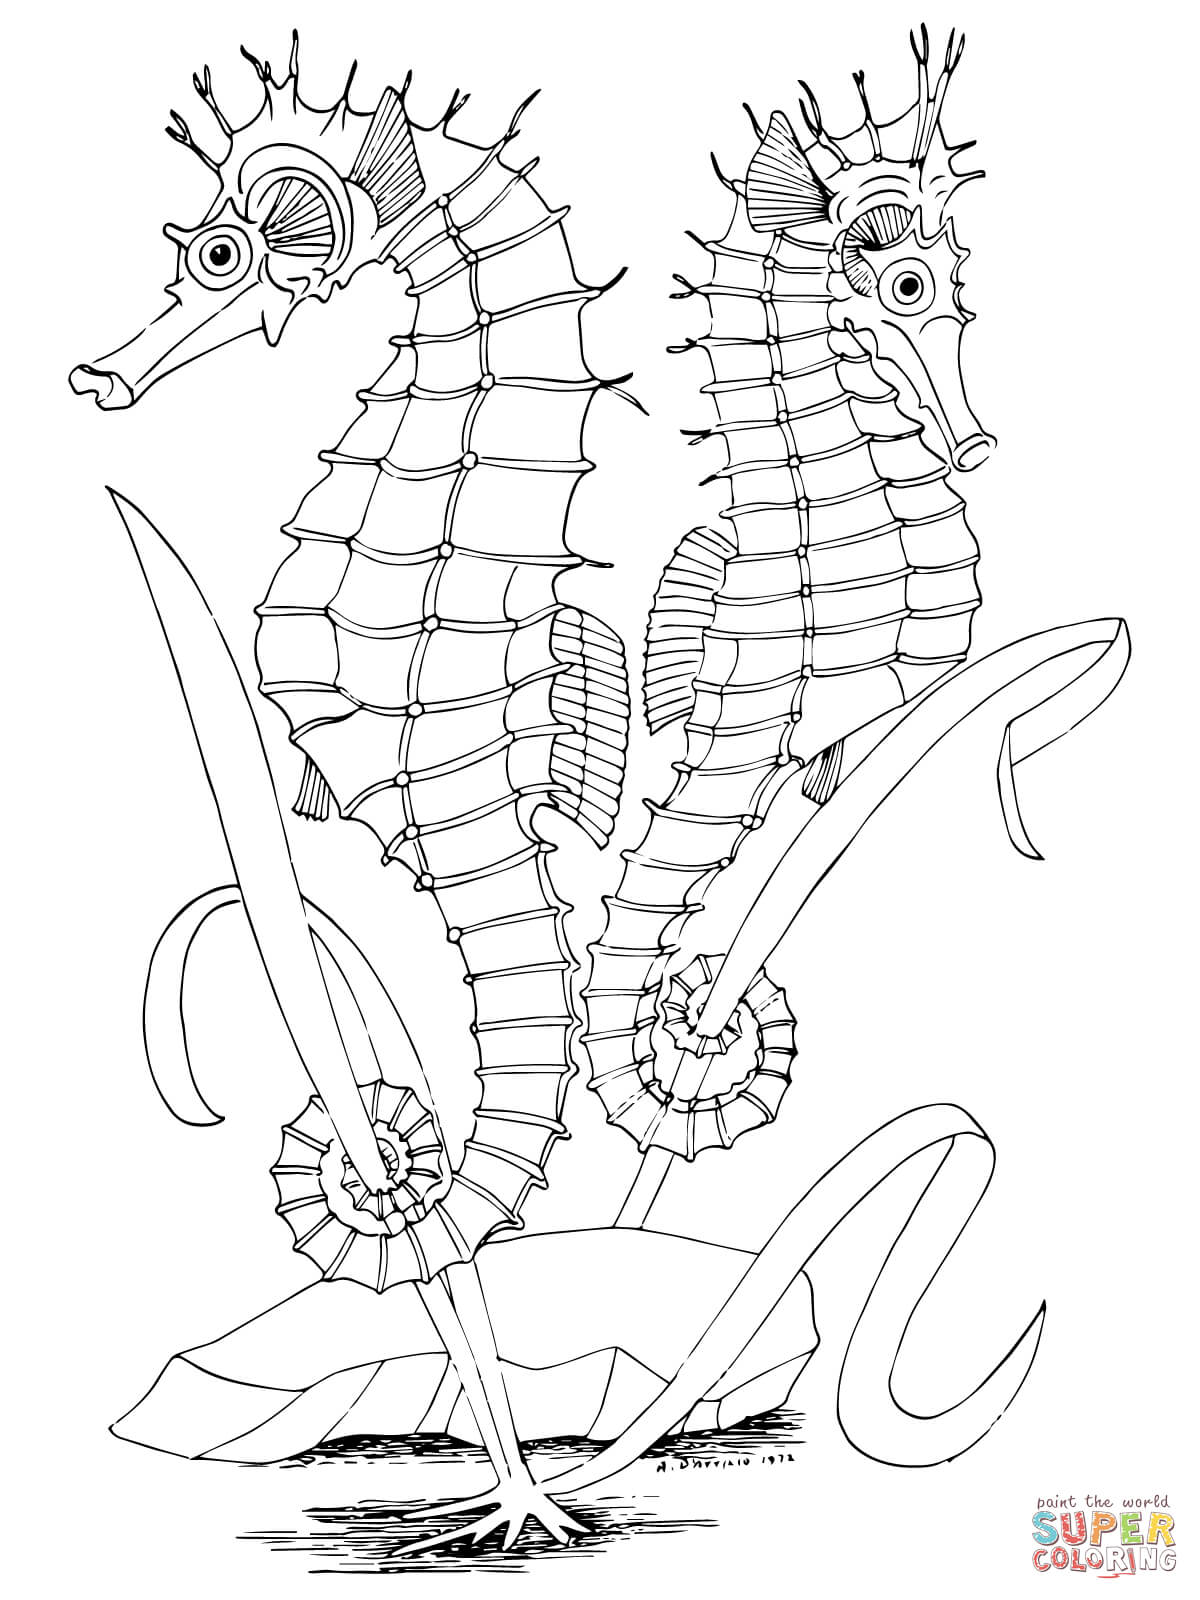 Two Seahorses coloring page | Free Printable Coloring Pages